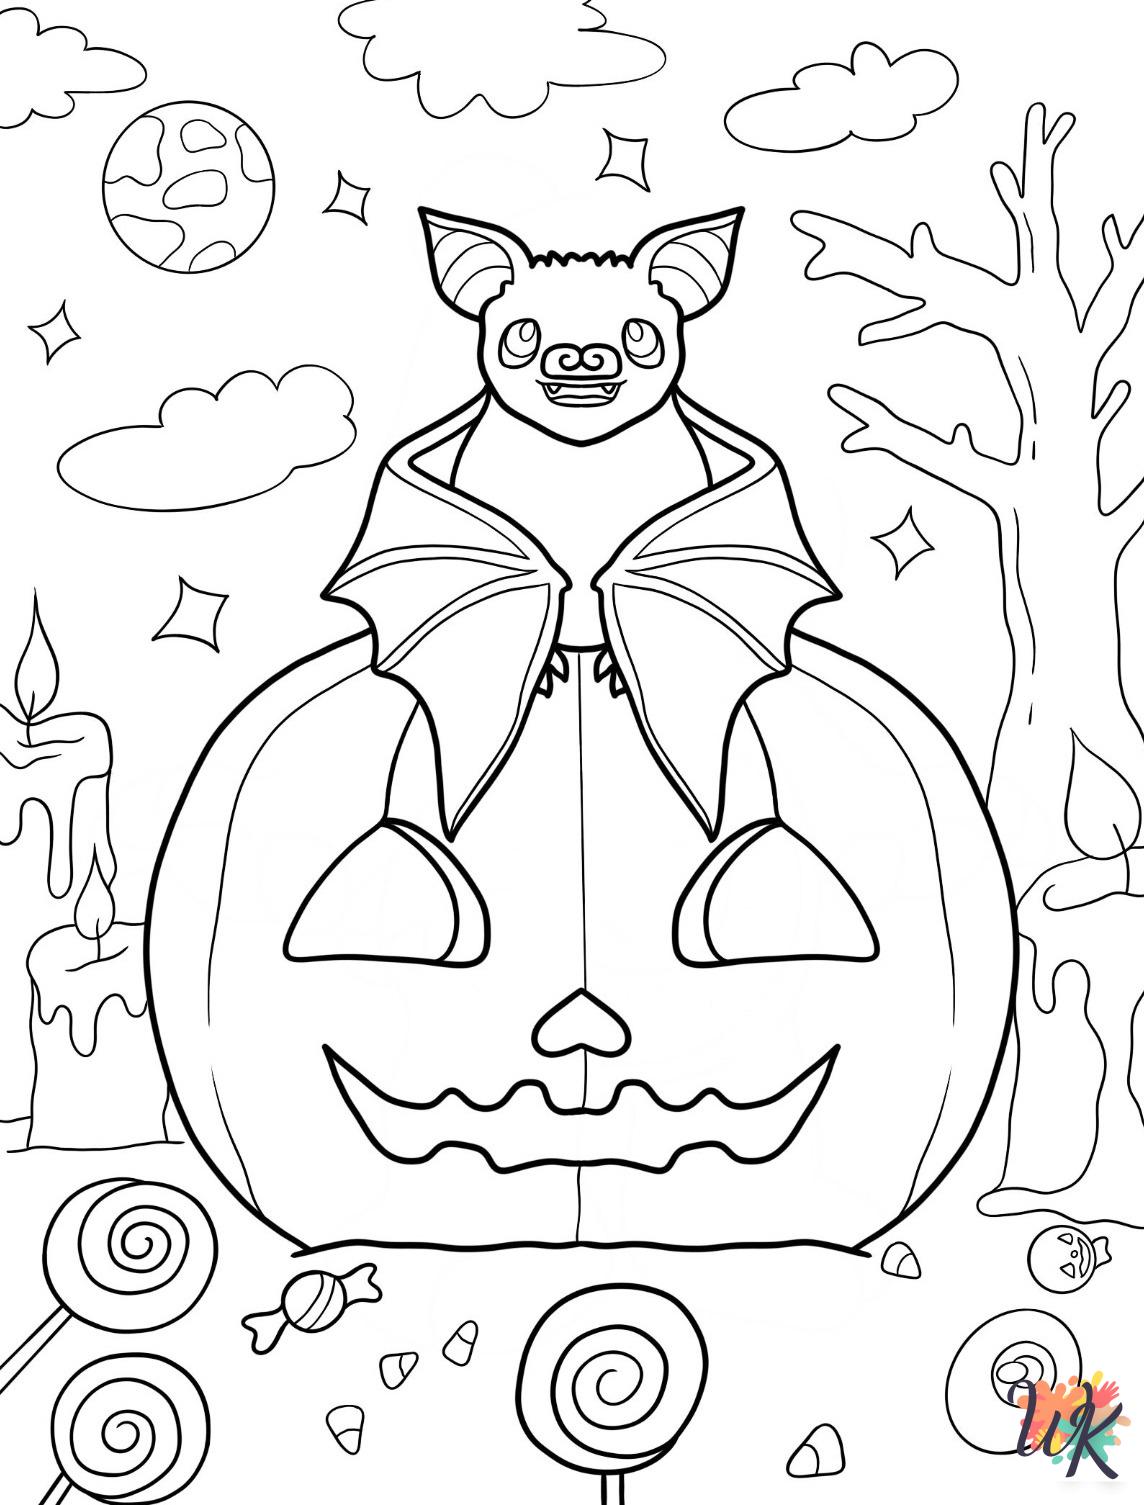 Bat coloring pages for kids